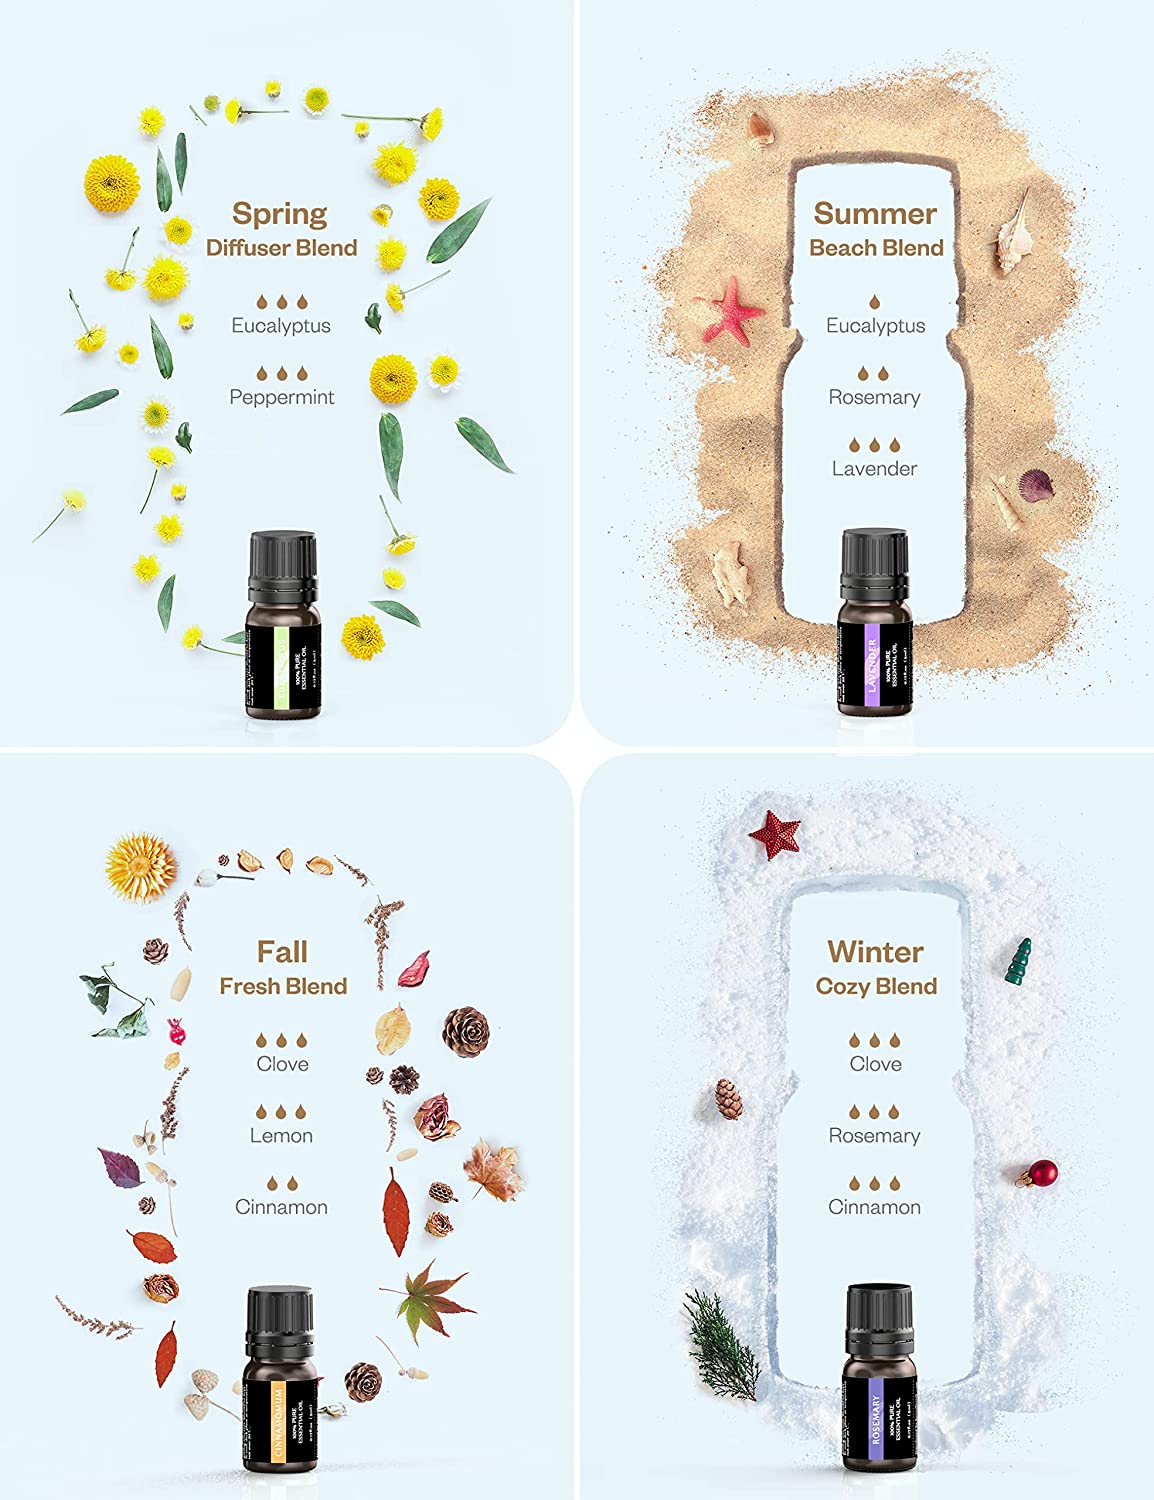 18 Pure Essential Oils, Aromatherapy, 18*5ml for Humidifier, Diffuser, Massage, Candle Making, Skin